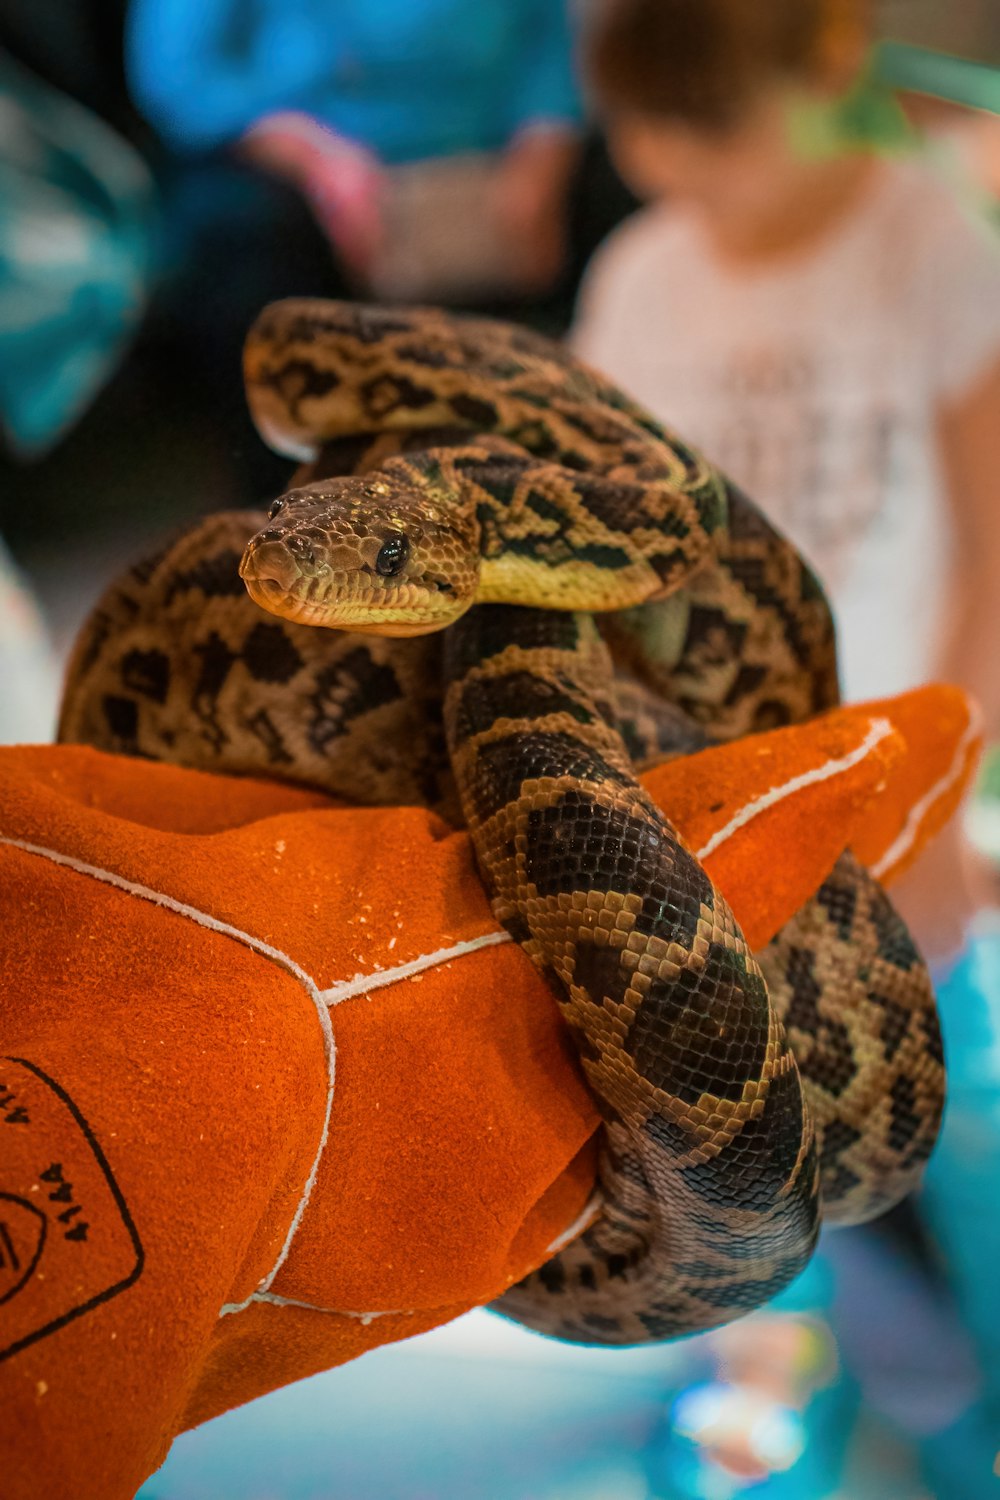 a stuffed snake is held in a person's hand